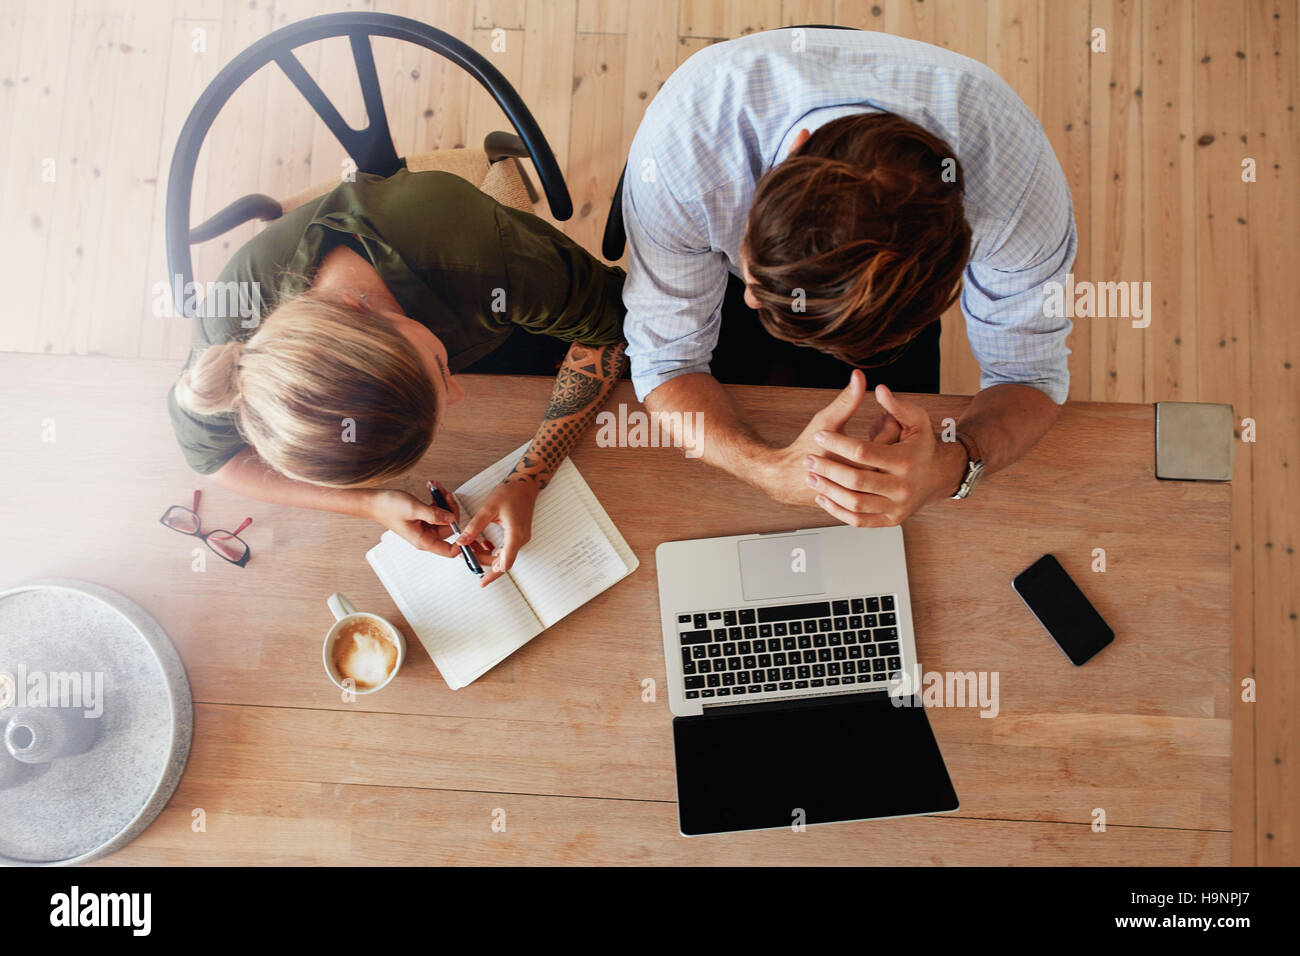 Top view of man and woman sitting at table and working. Two people working together on laptop. Stock Photo